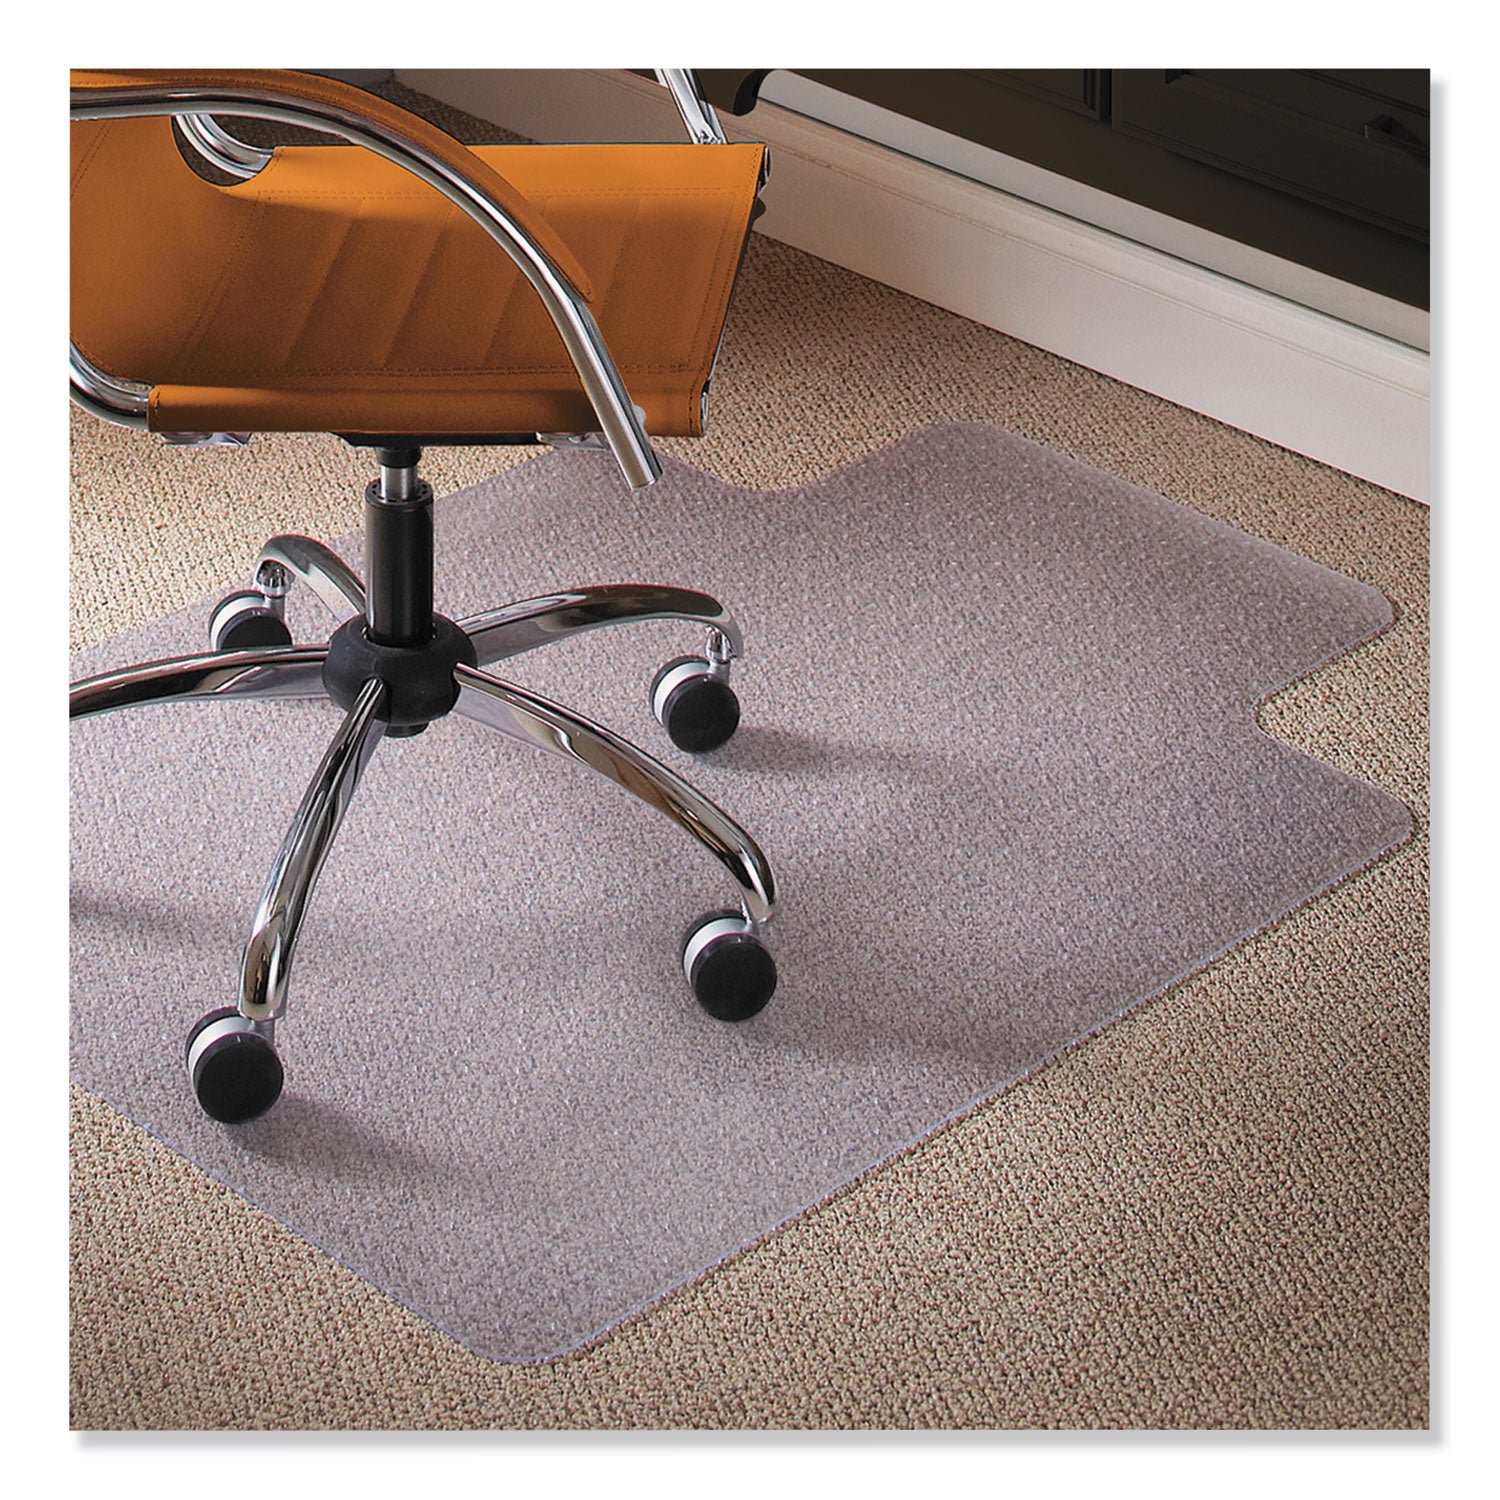 Natural Origins Chair Mat with Lip For Carpet, 36 x 48, Clear - 